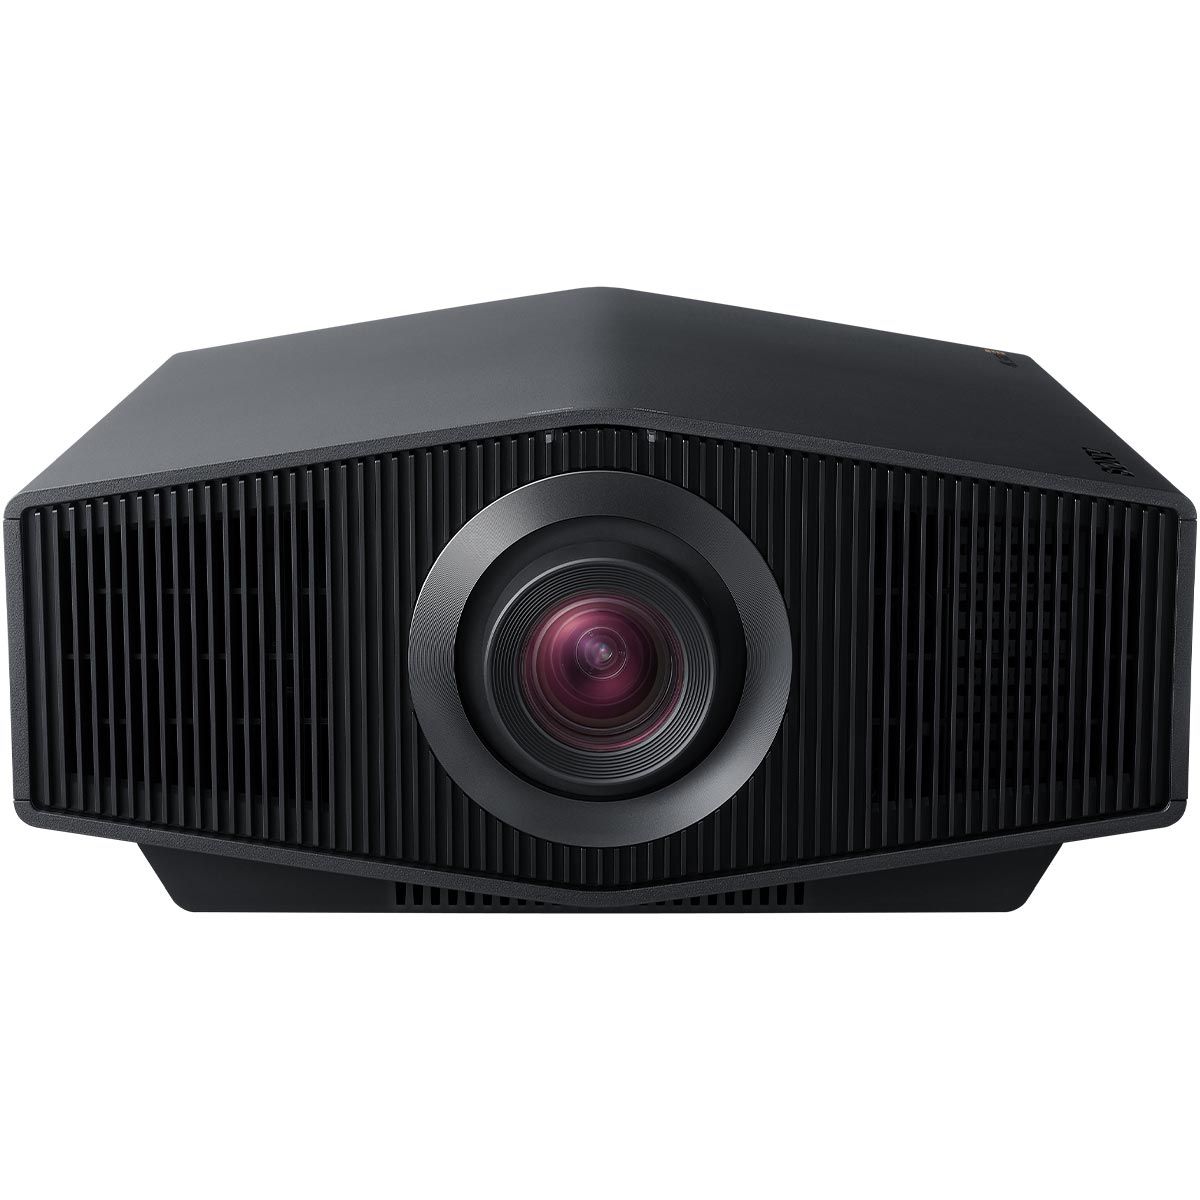 Sony VPL-XW7000ES Native 4K SXRD Laser Projector - black - front view